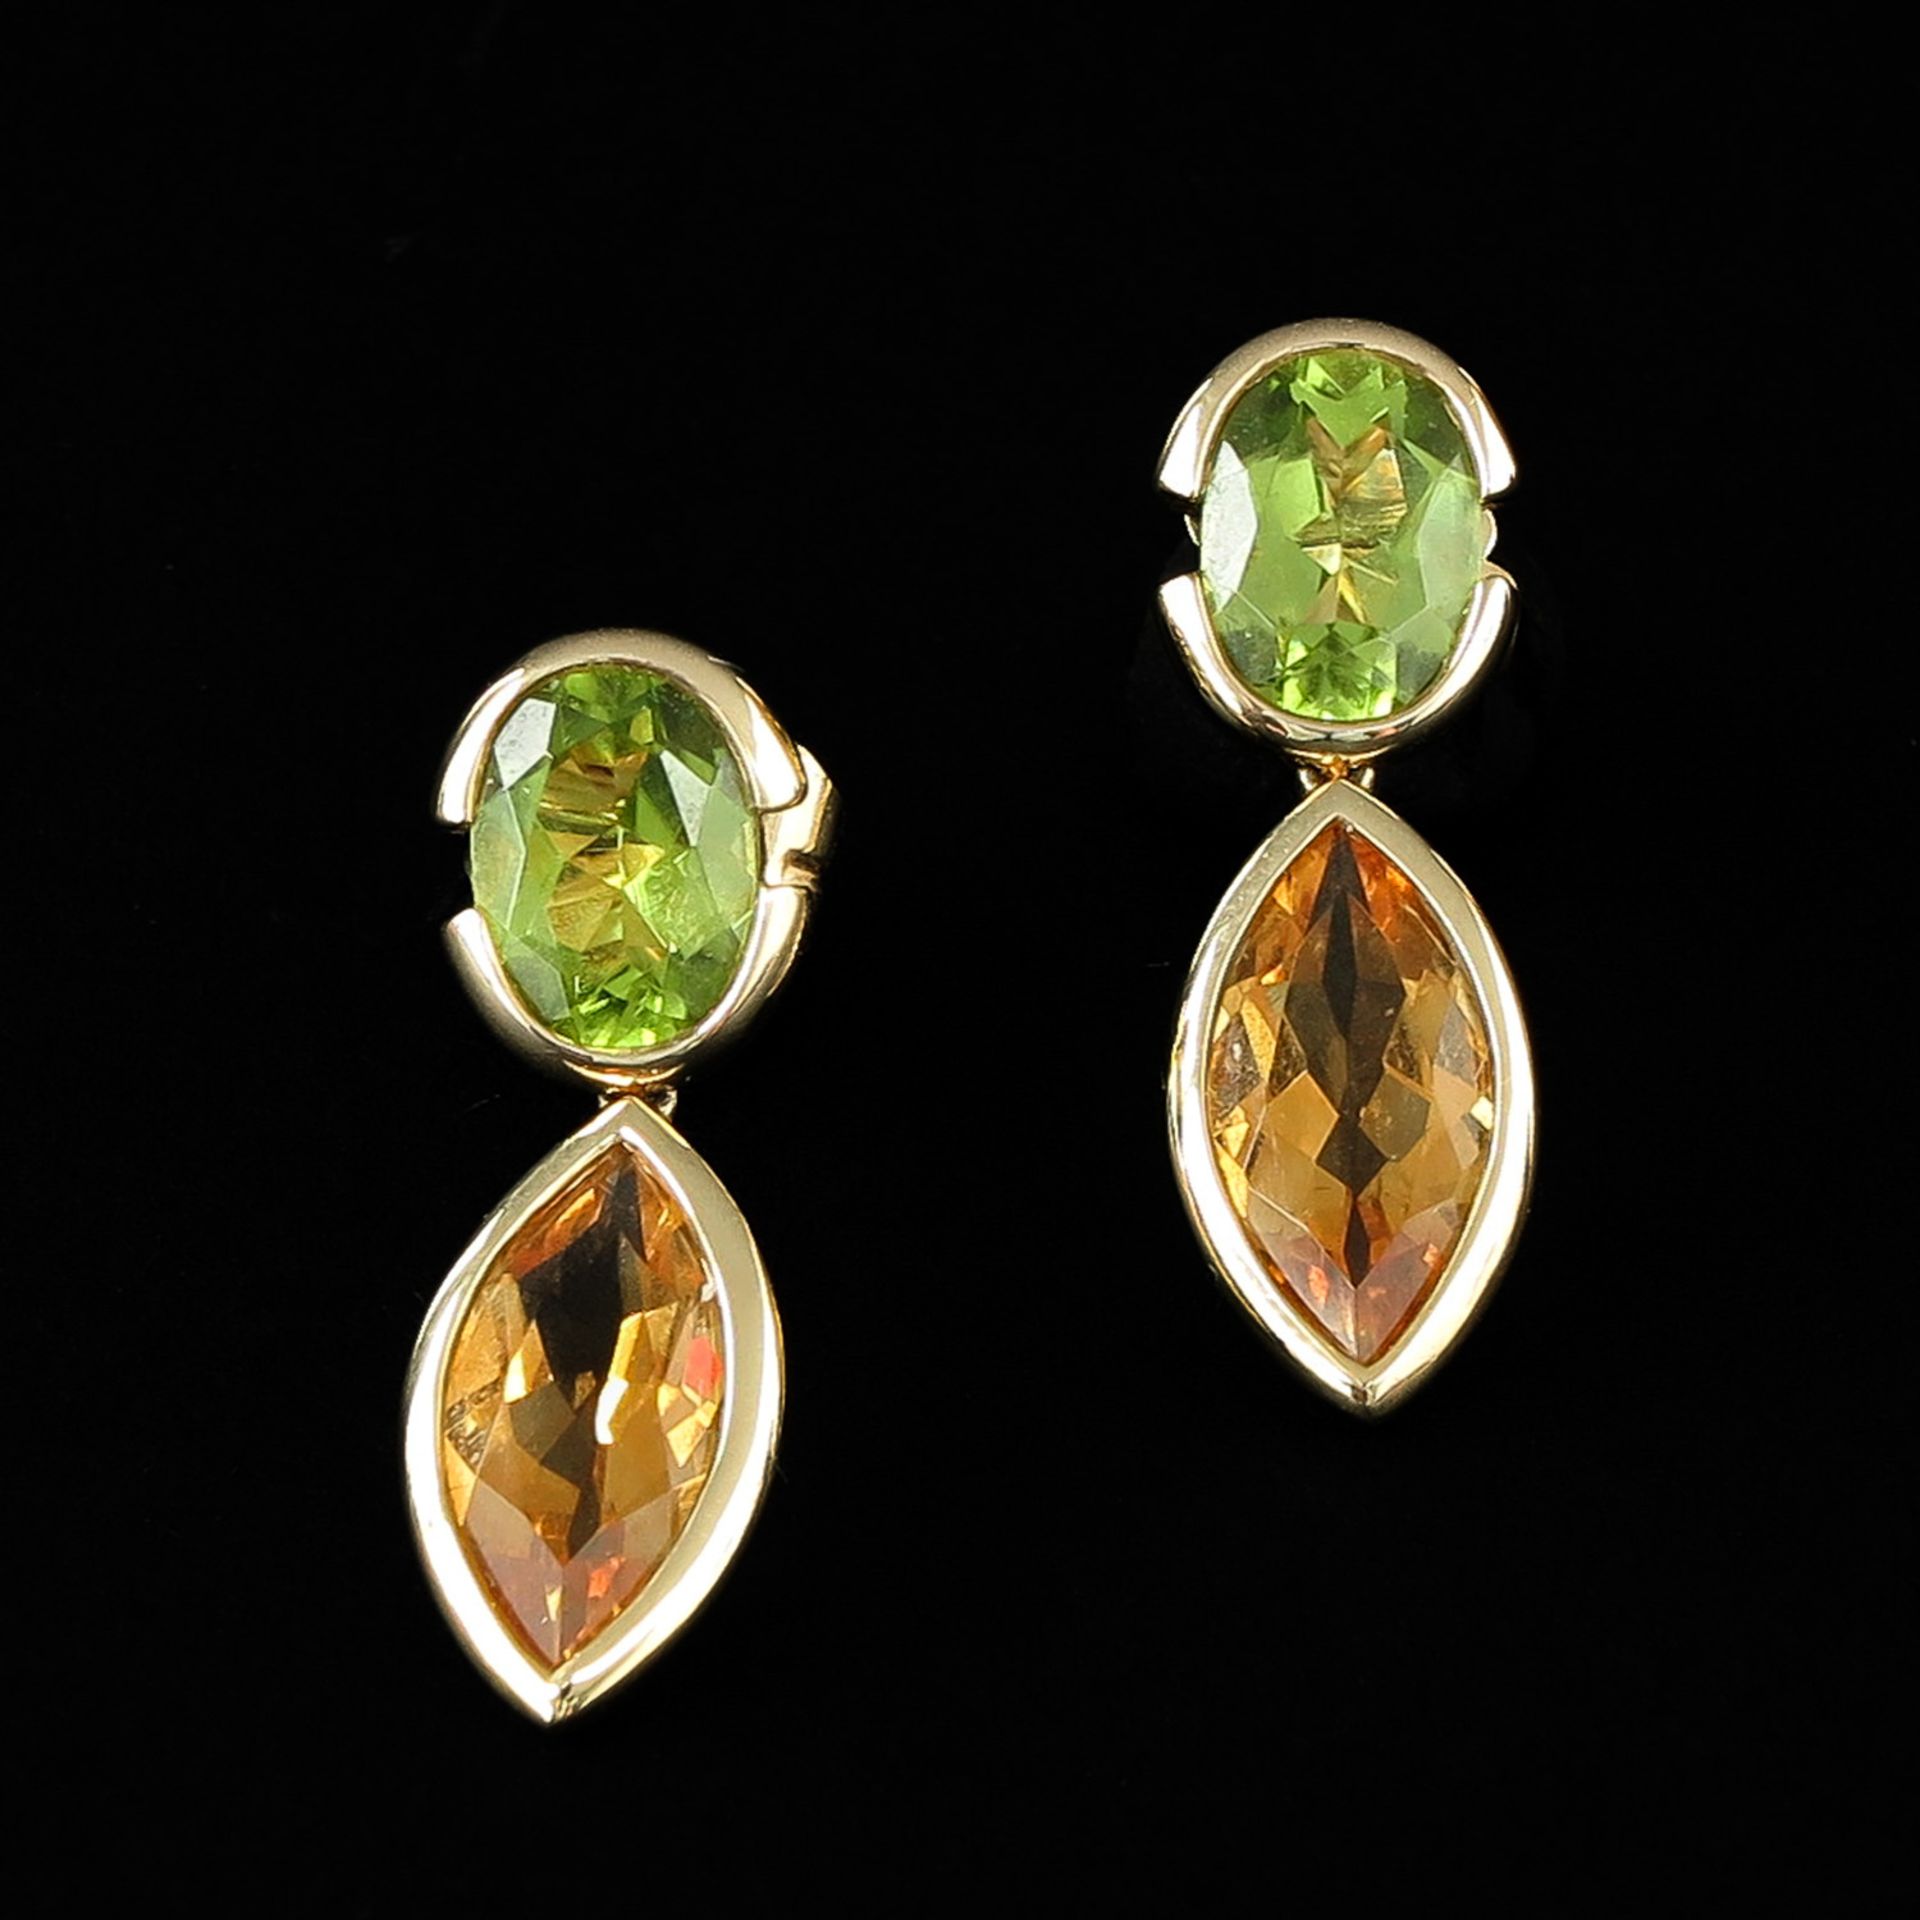 A Pair of 14KG Peridot and Citrine Earrings